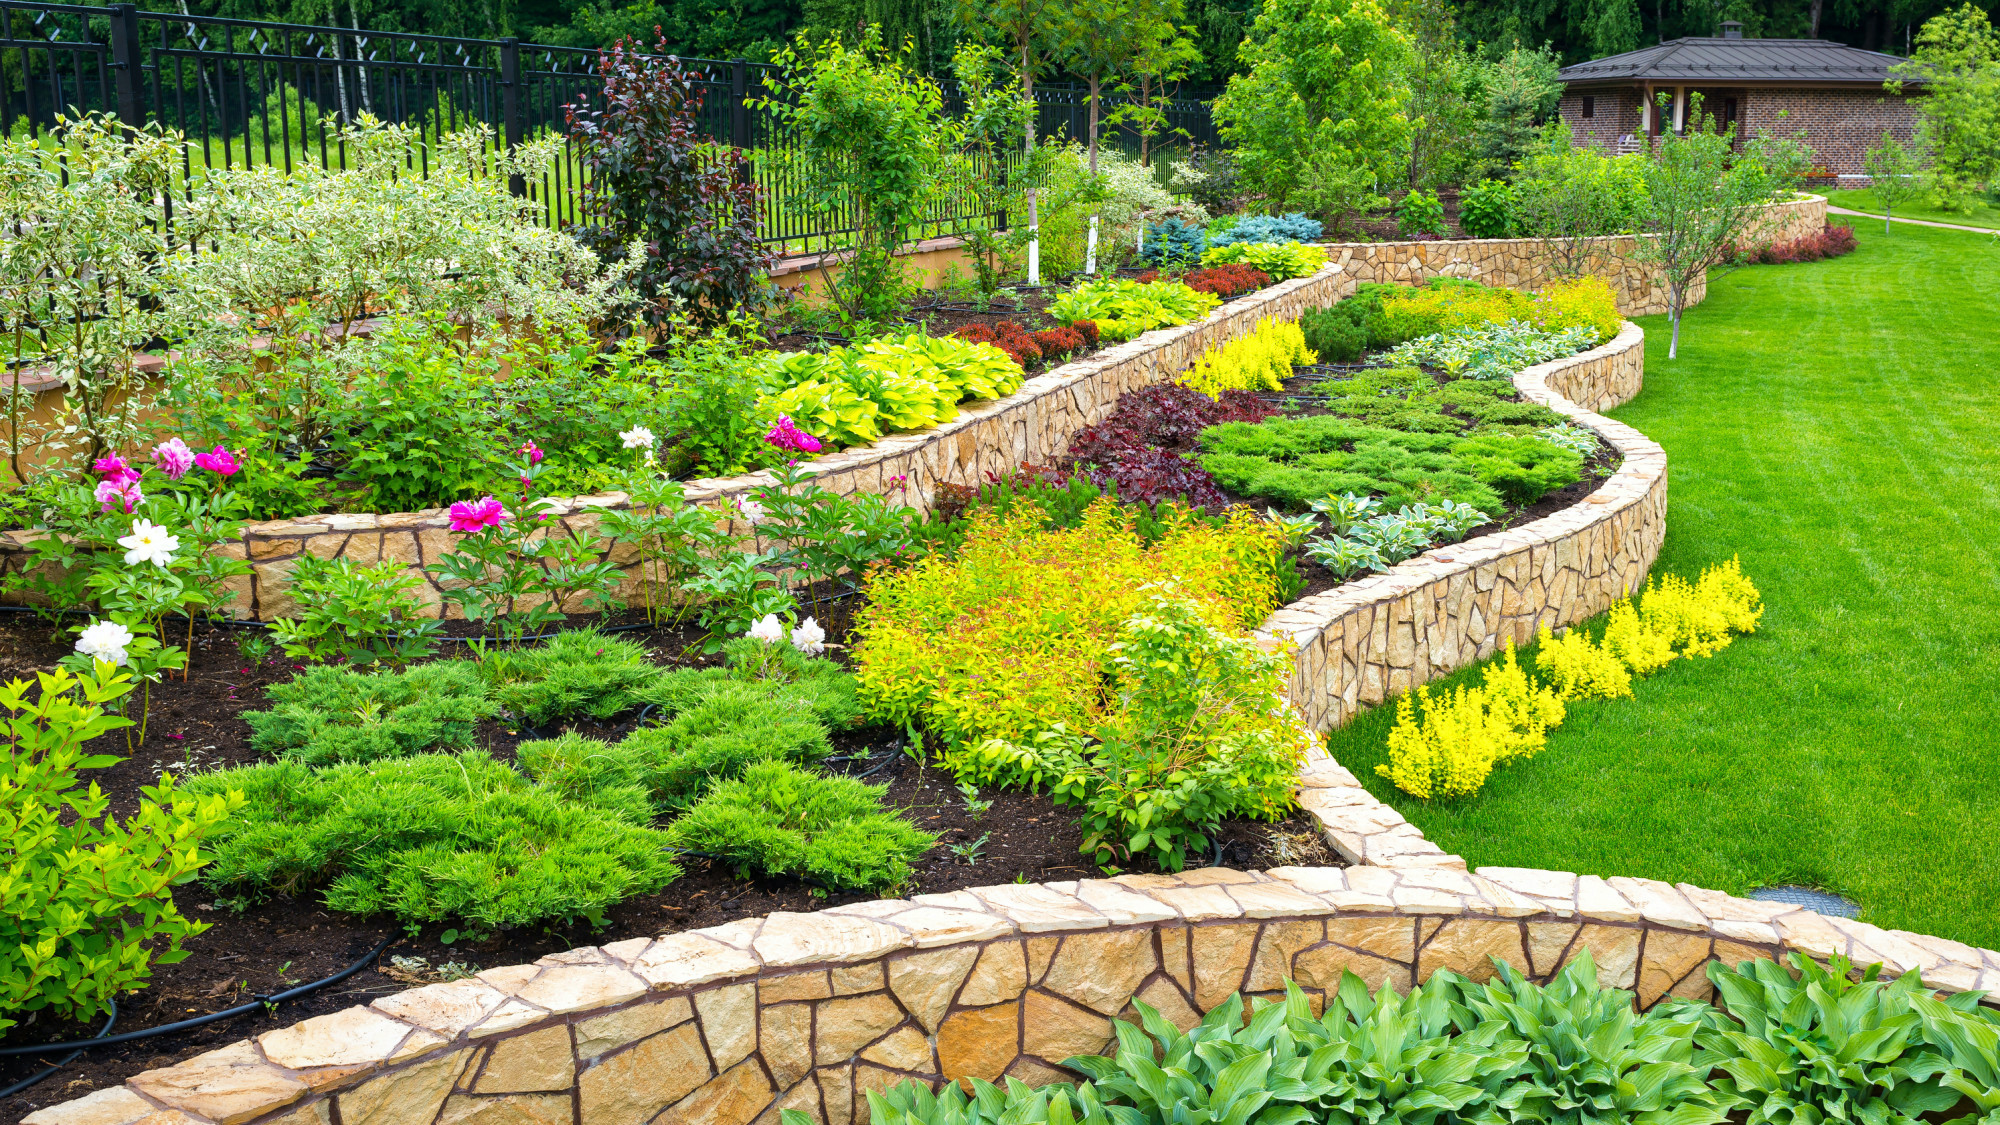 As a homeowner, it is important to do what you can to take care of your yard. Here are 5 landscaping tips that everyone should know.